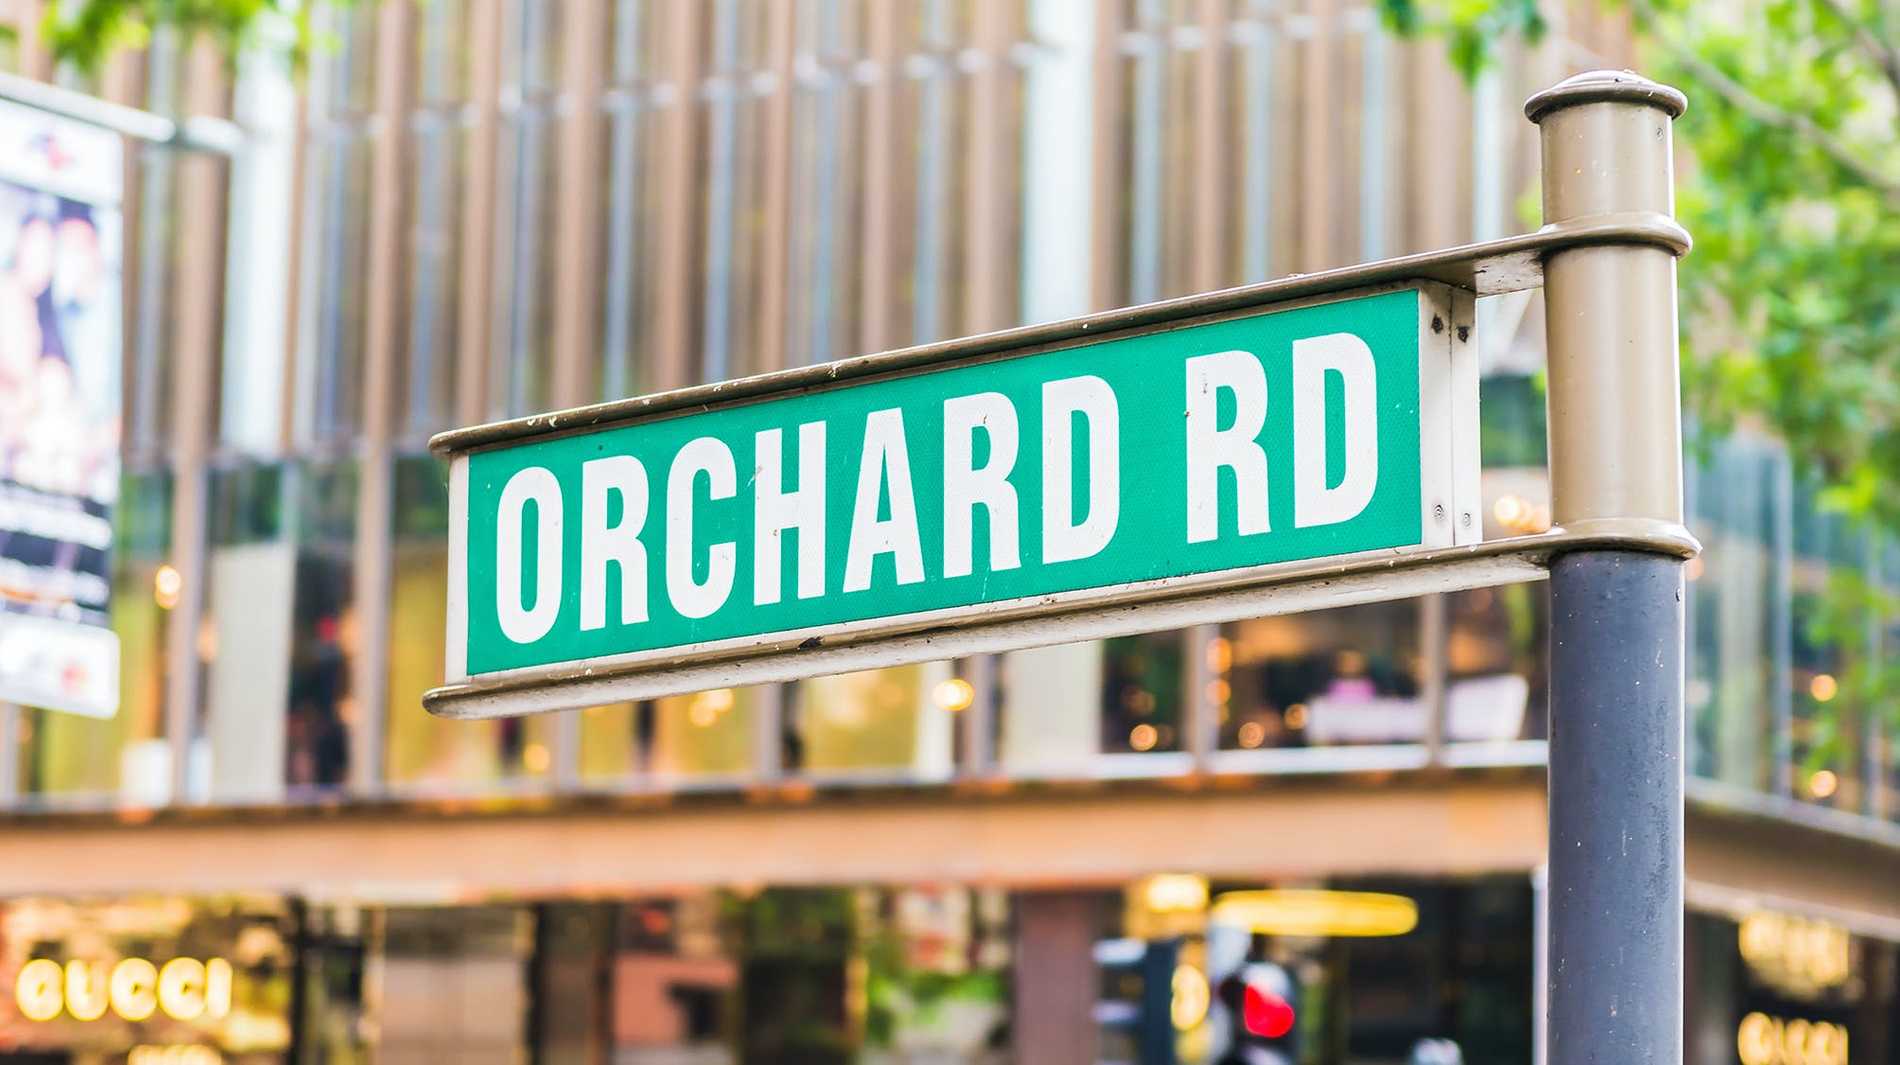 A street sign for Orchard Road in front of one of the many shopping malls along this street.